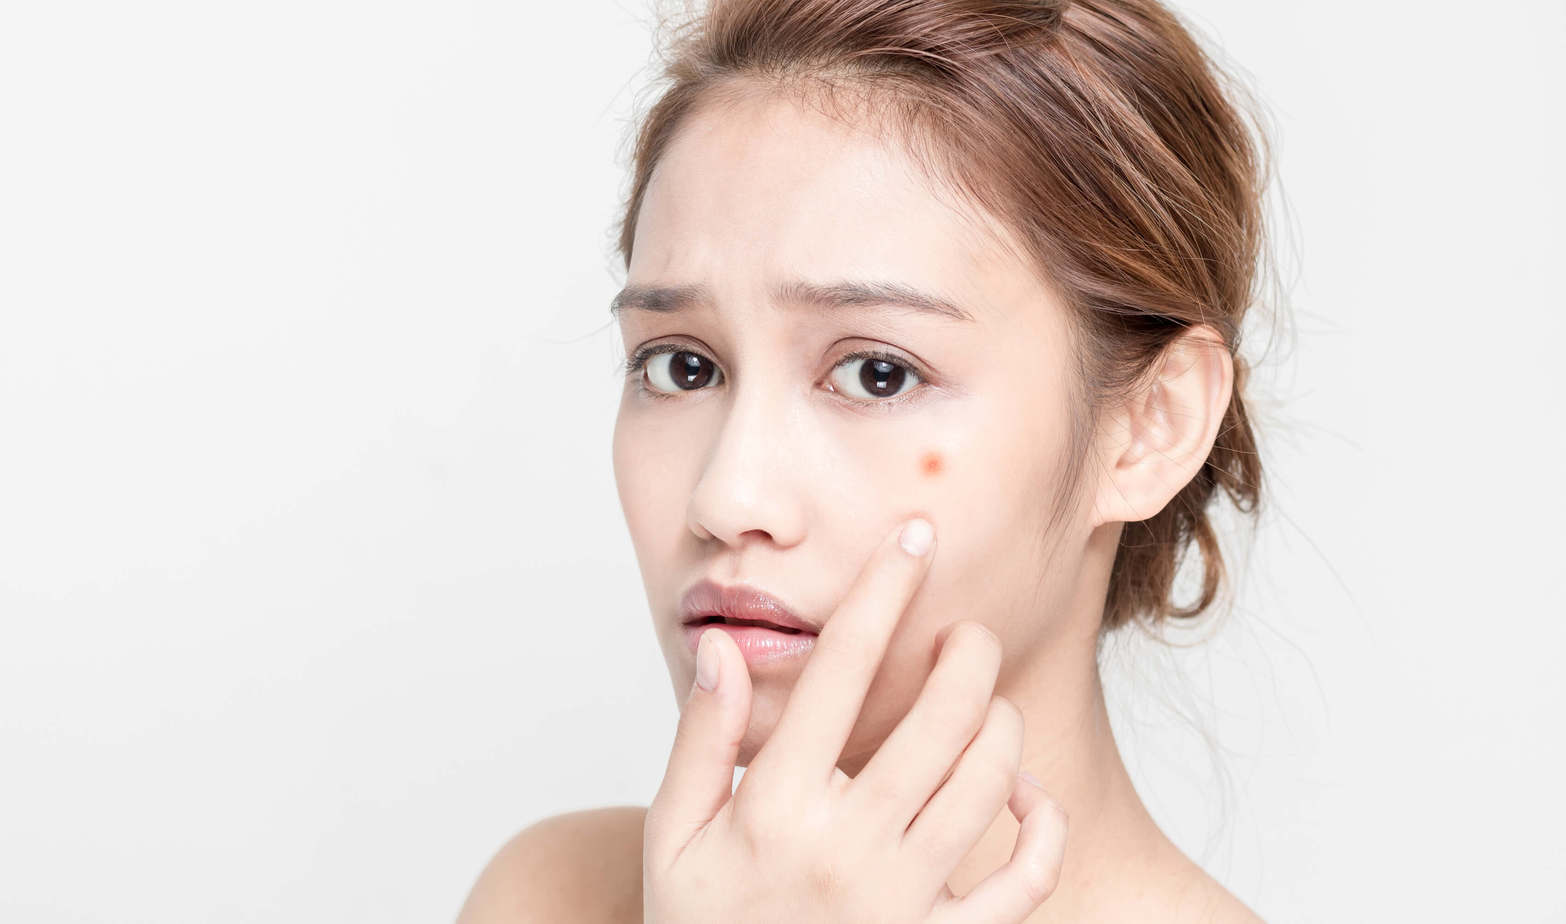 Guide to Treating Callused Acne Safely Endorsed